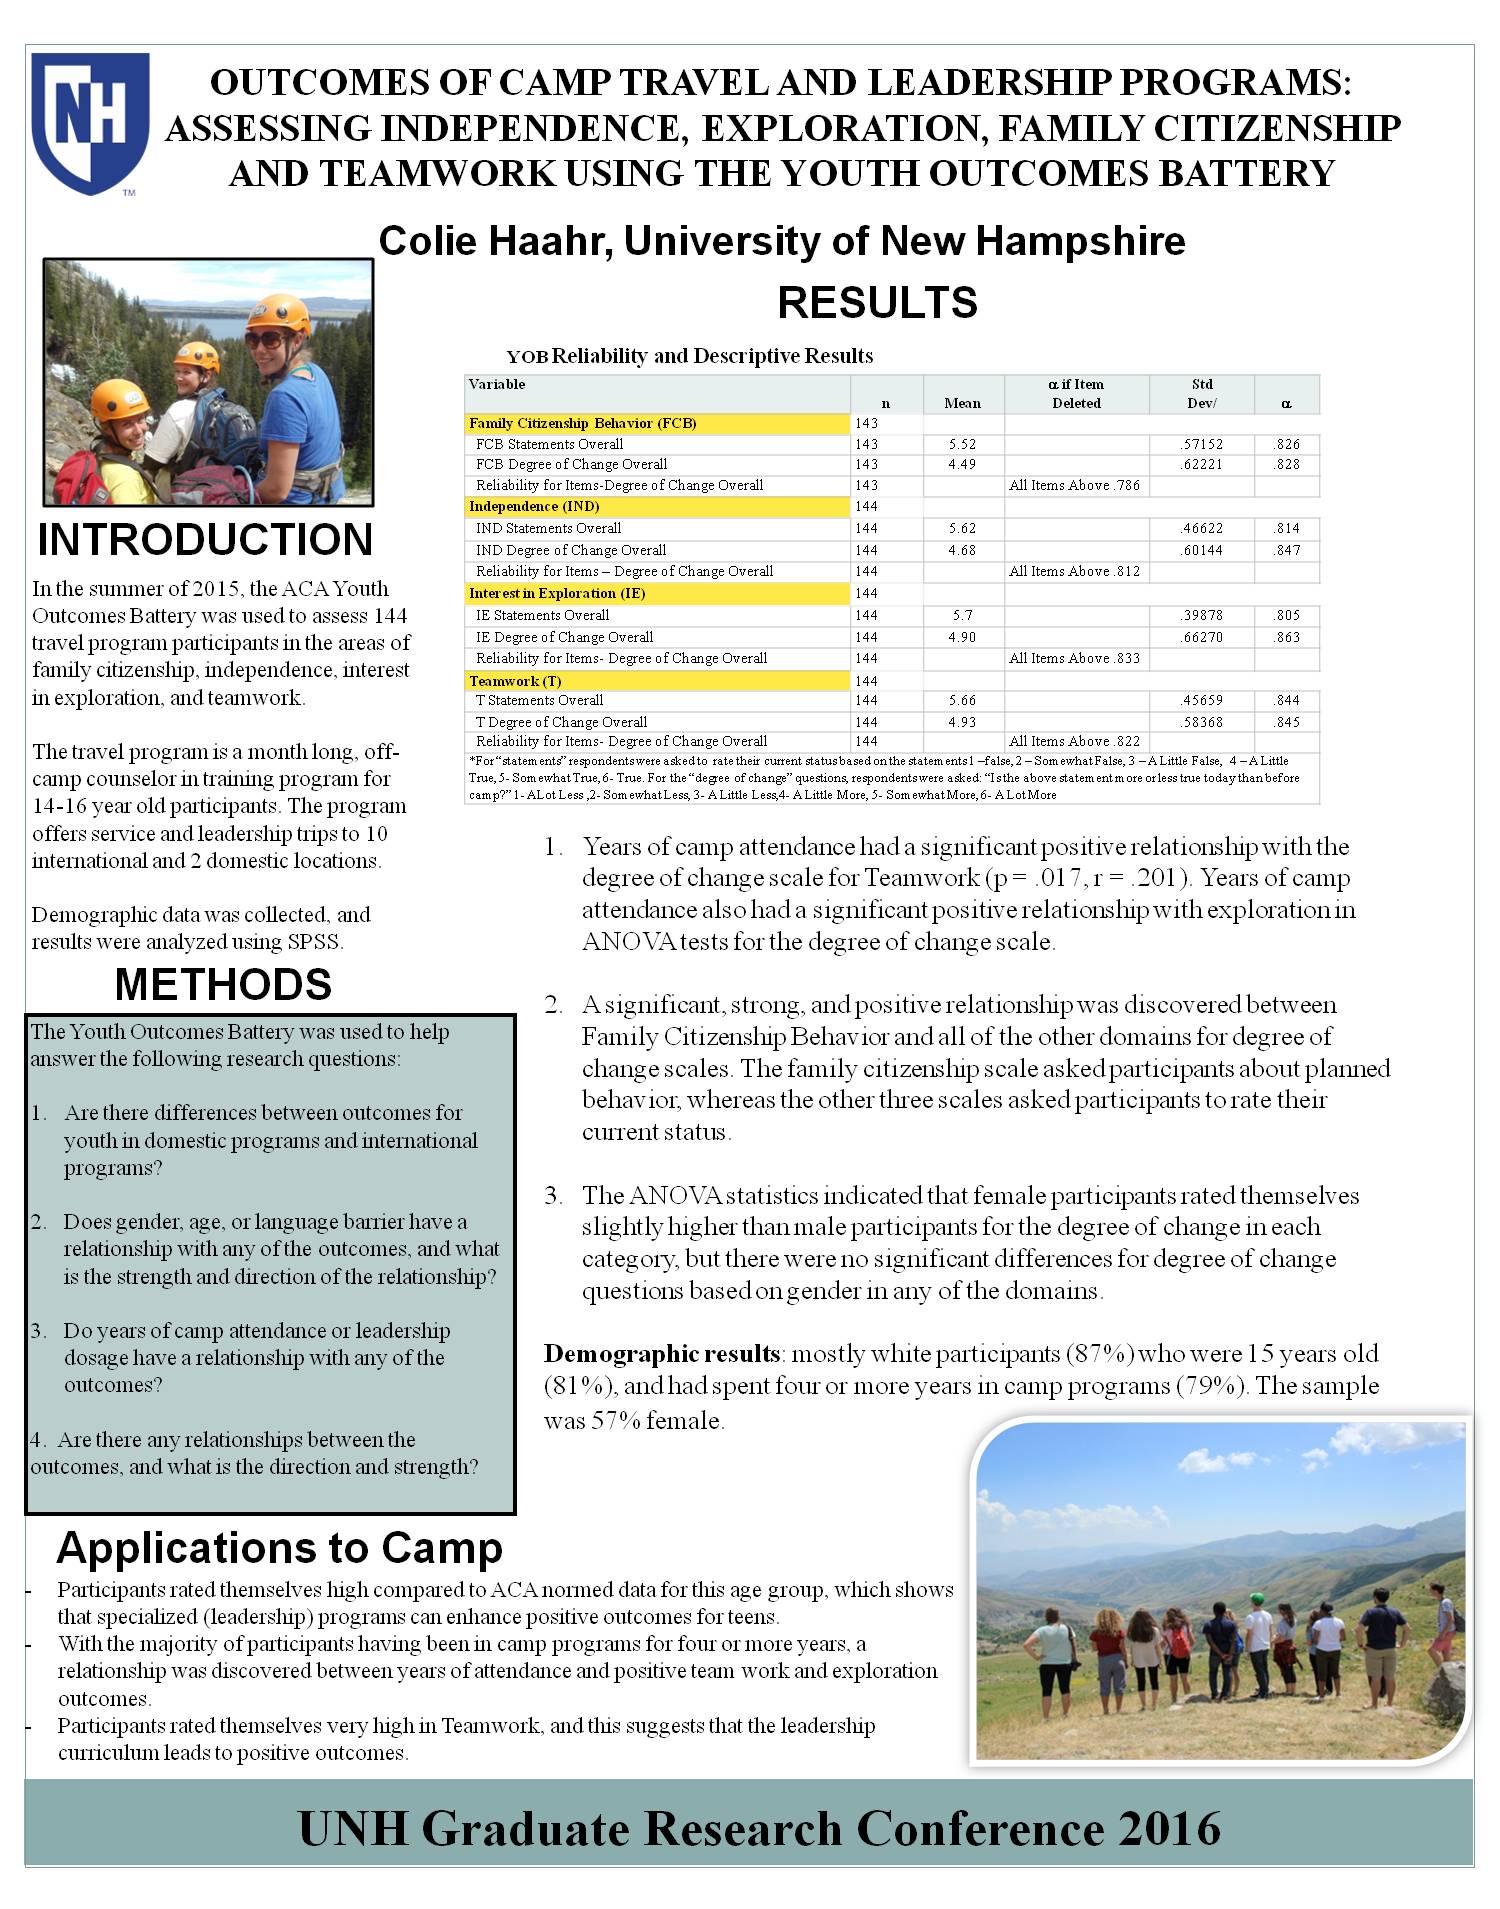 Outcomes Of Camp Travel And Leadership Programs: Assessing Independence, Exploration, Family Citizenship And Teamwork Using The Youth Outcomes Battery  by neh2012